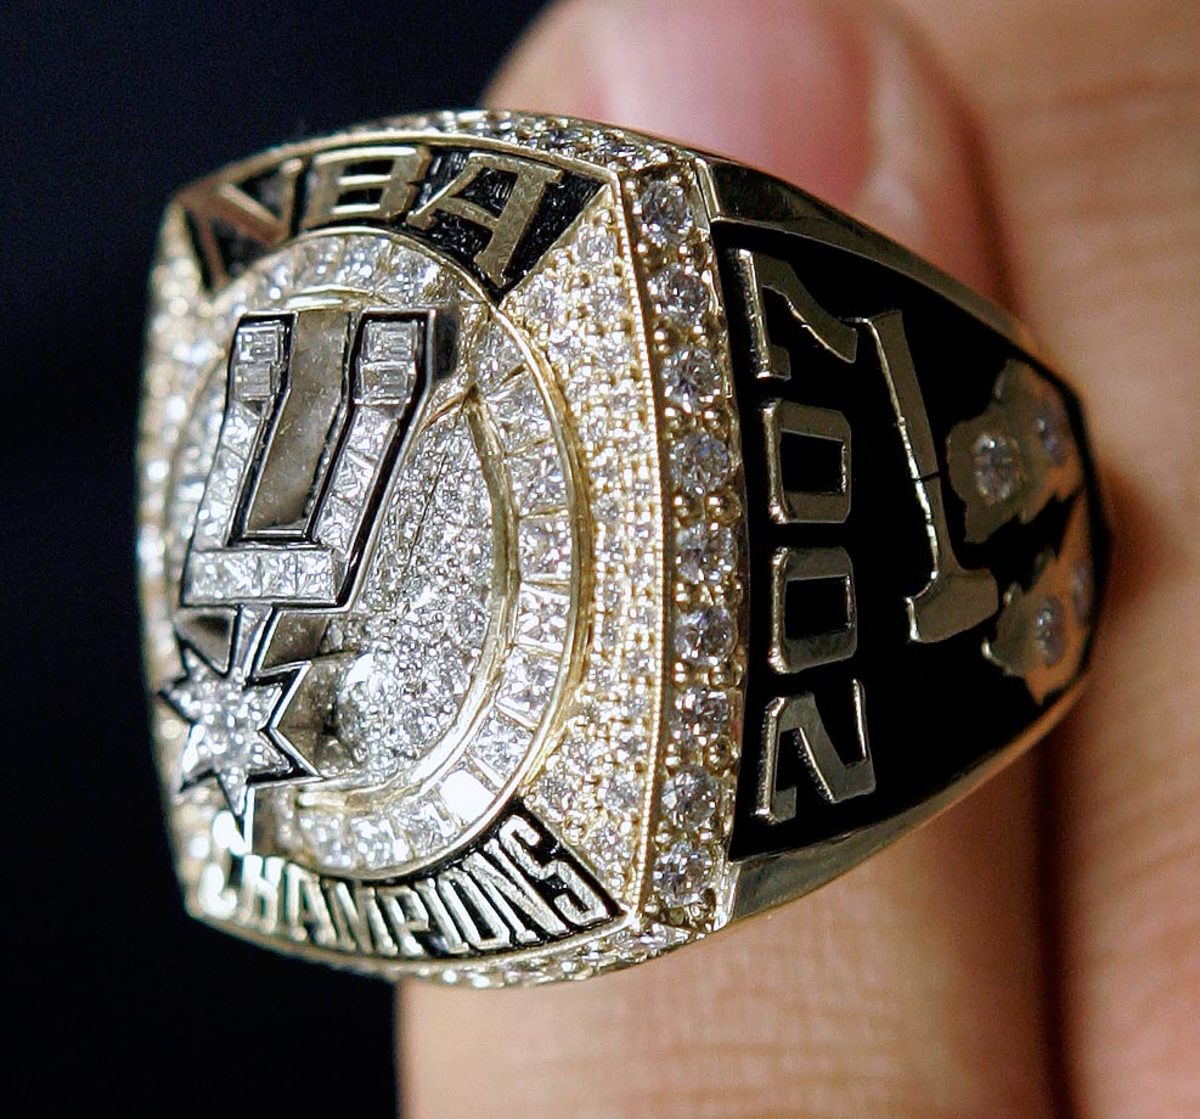 NBA Championship Rings Through the Years - Sports Illustrated